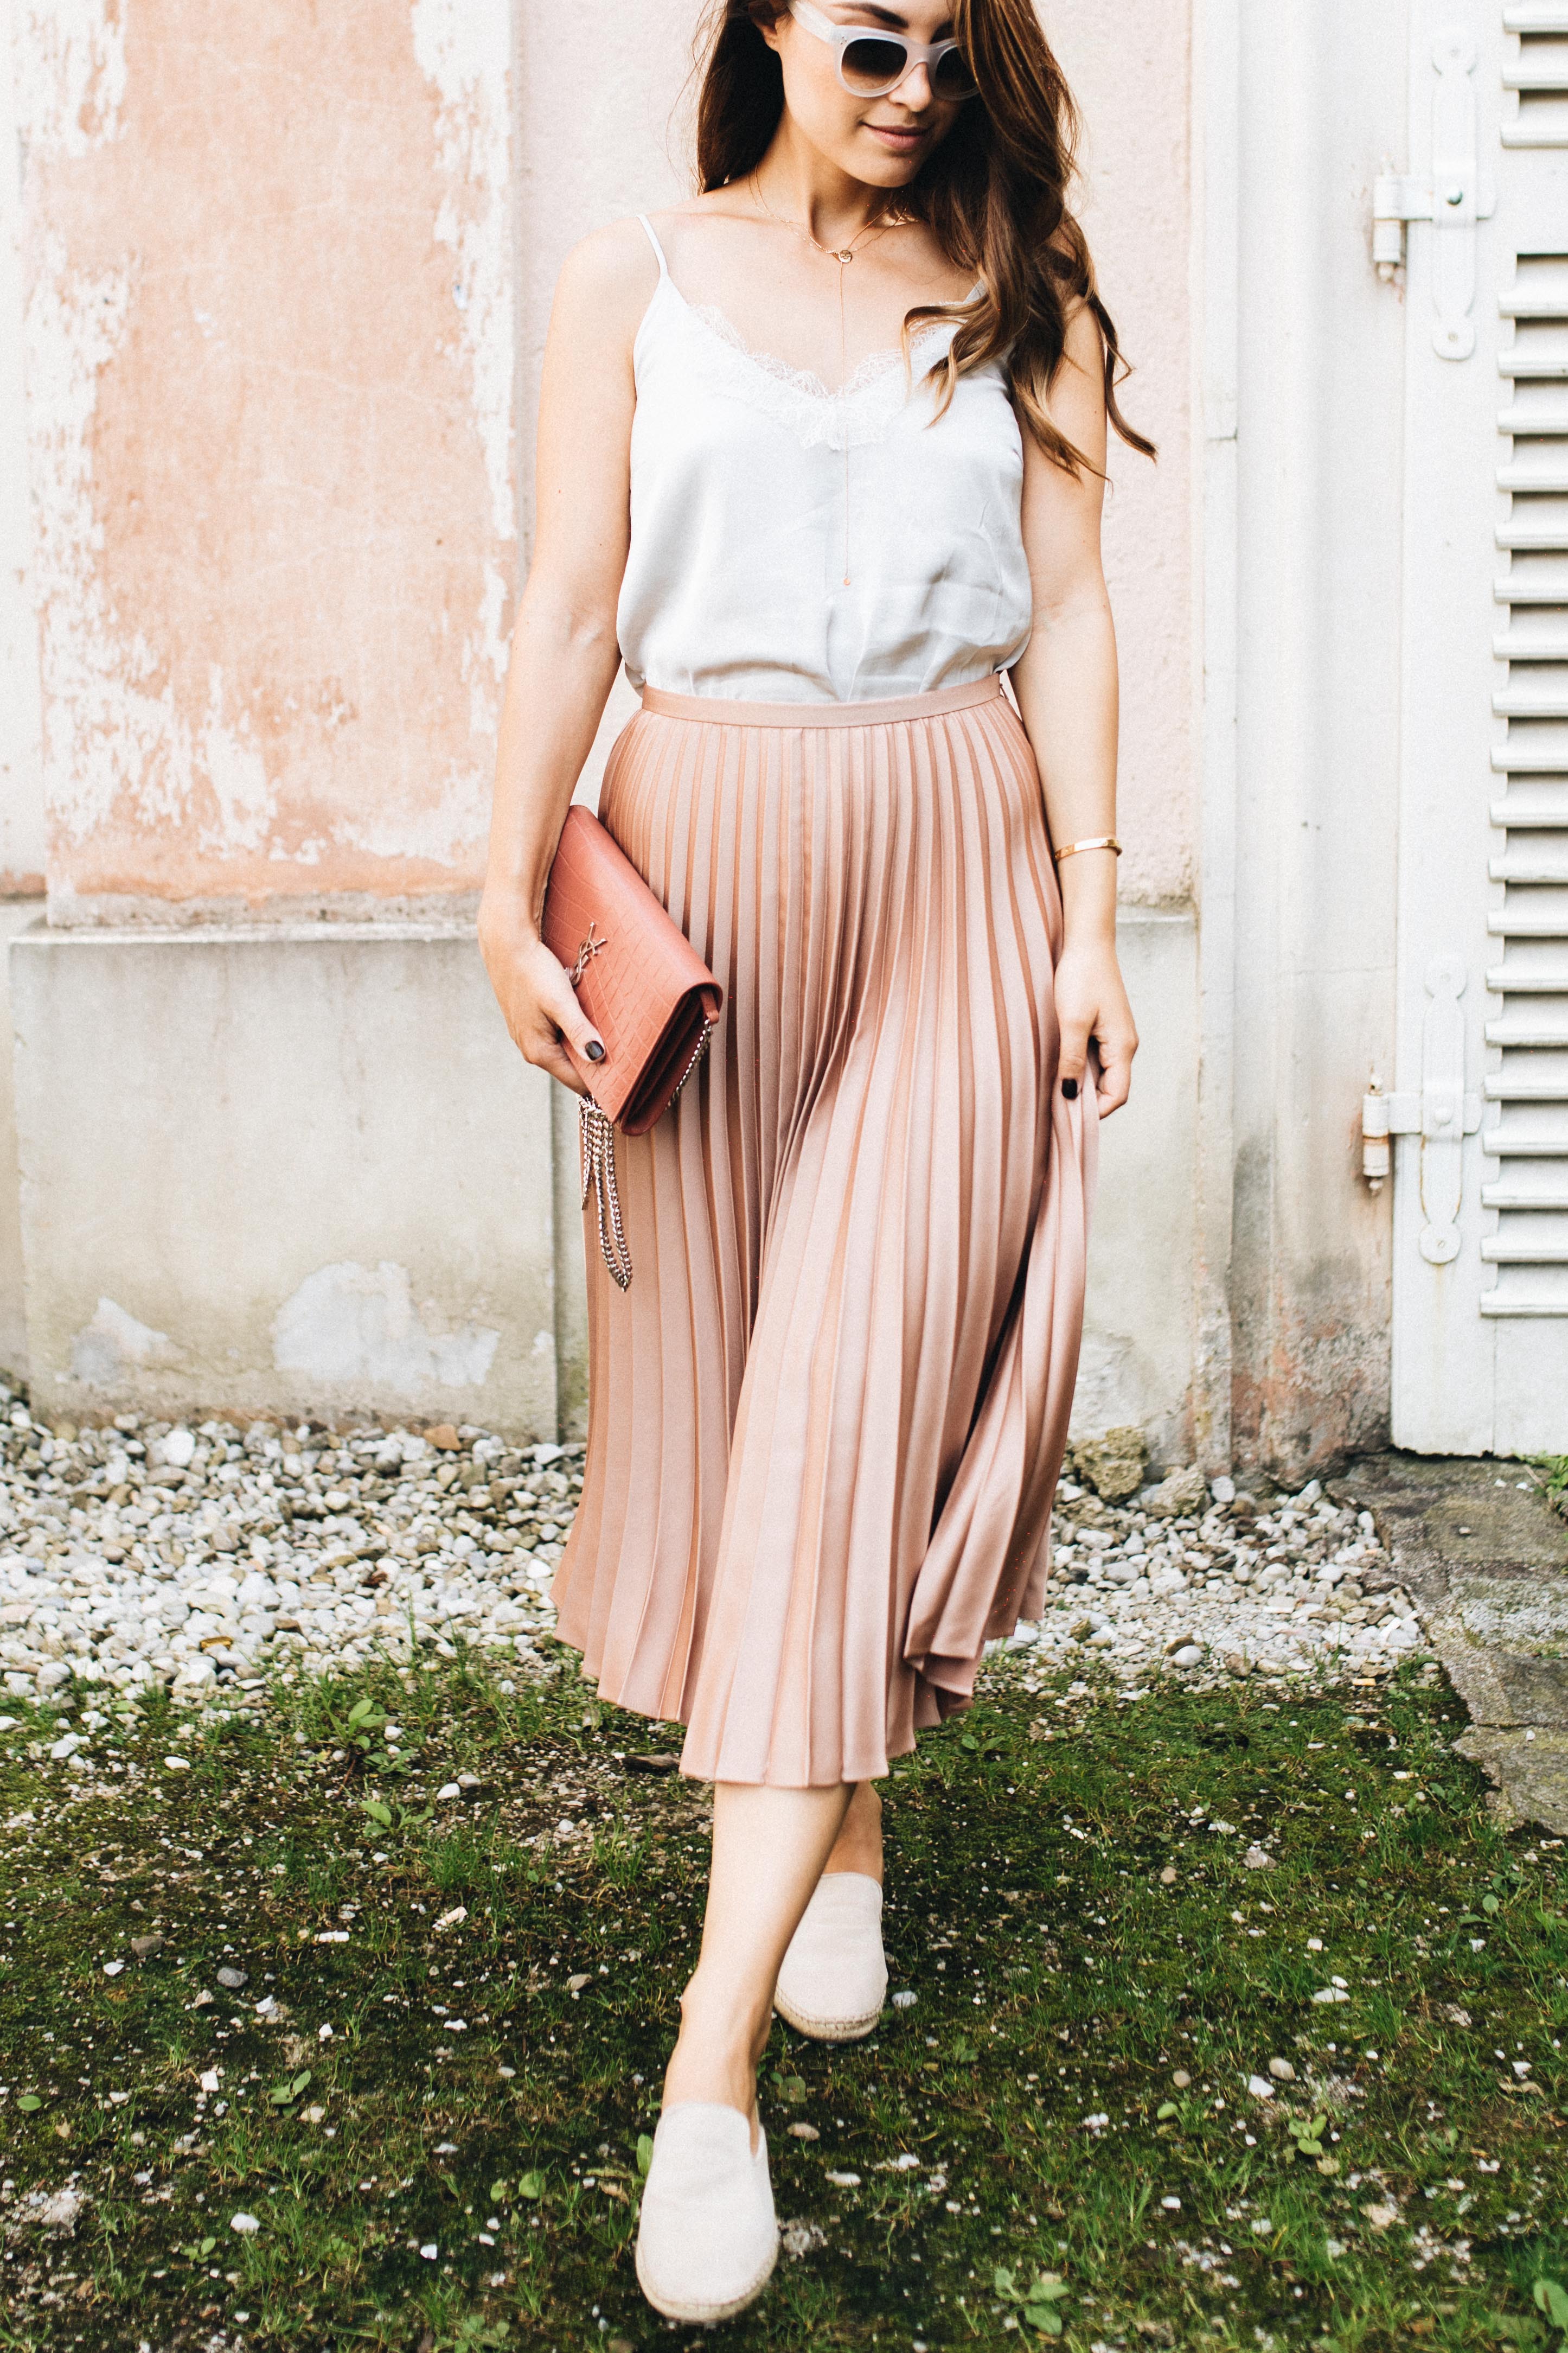 Outfit: How to wear plissé skirts during the day | YSL chain wallet, Hallhuber plissé skirt, Steve Madden espadrilles, Marc O'Polo silk camisole | you rock my life